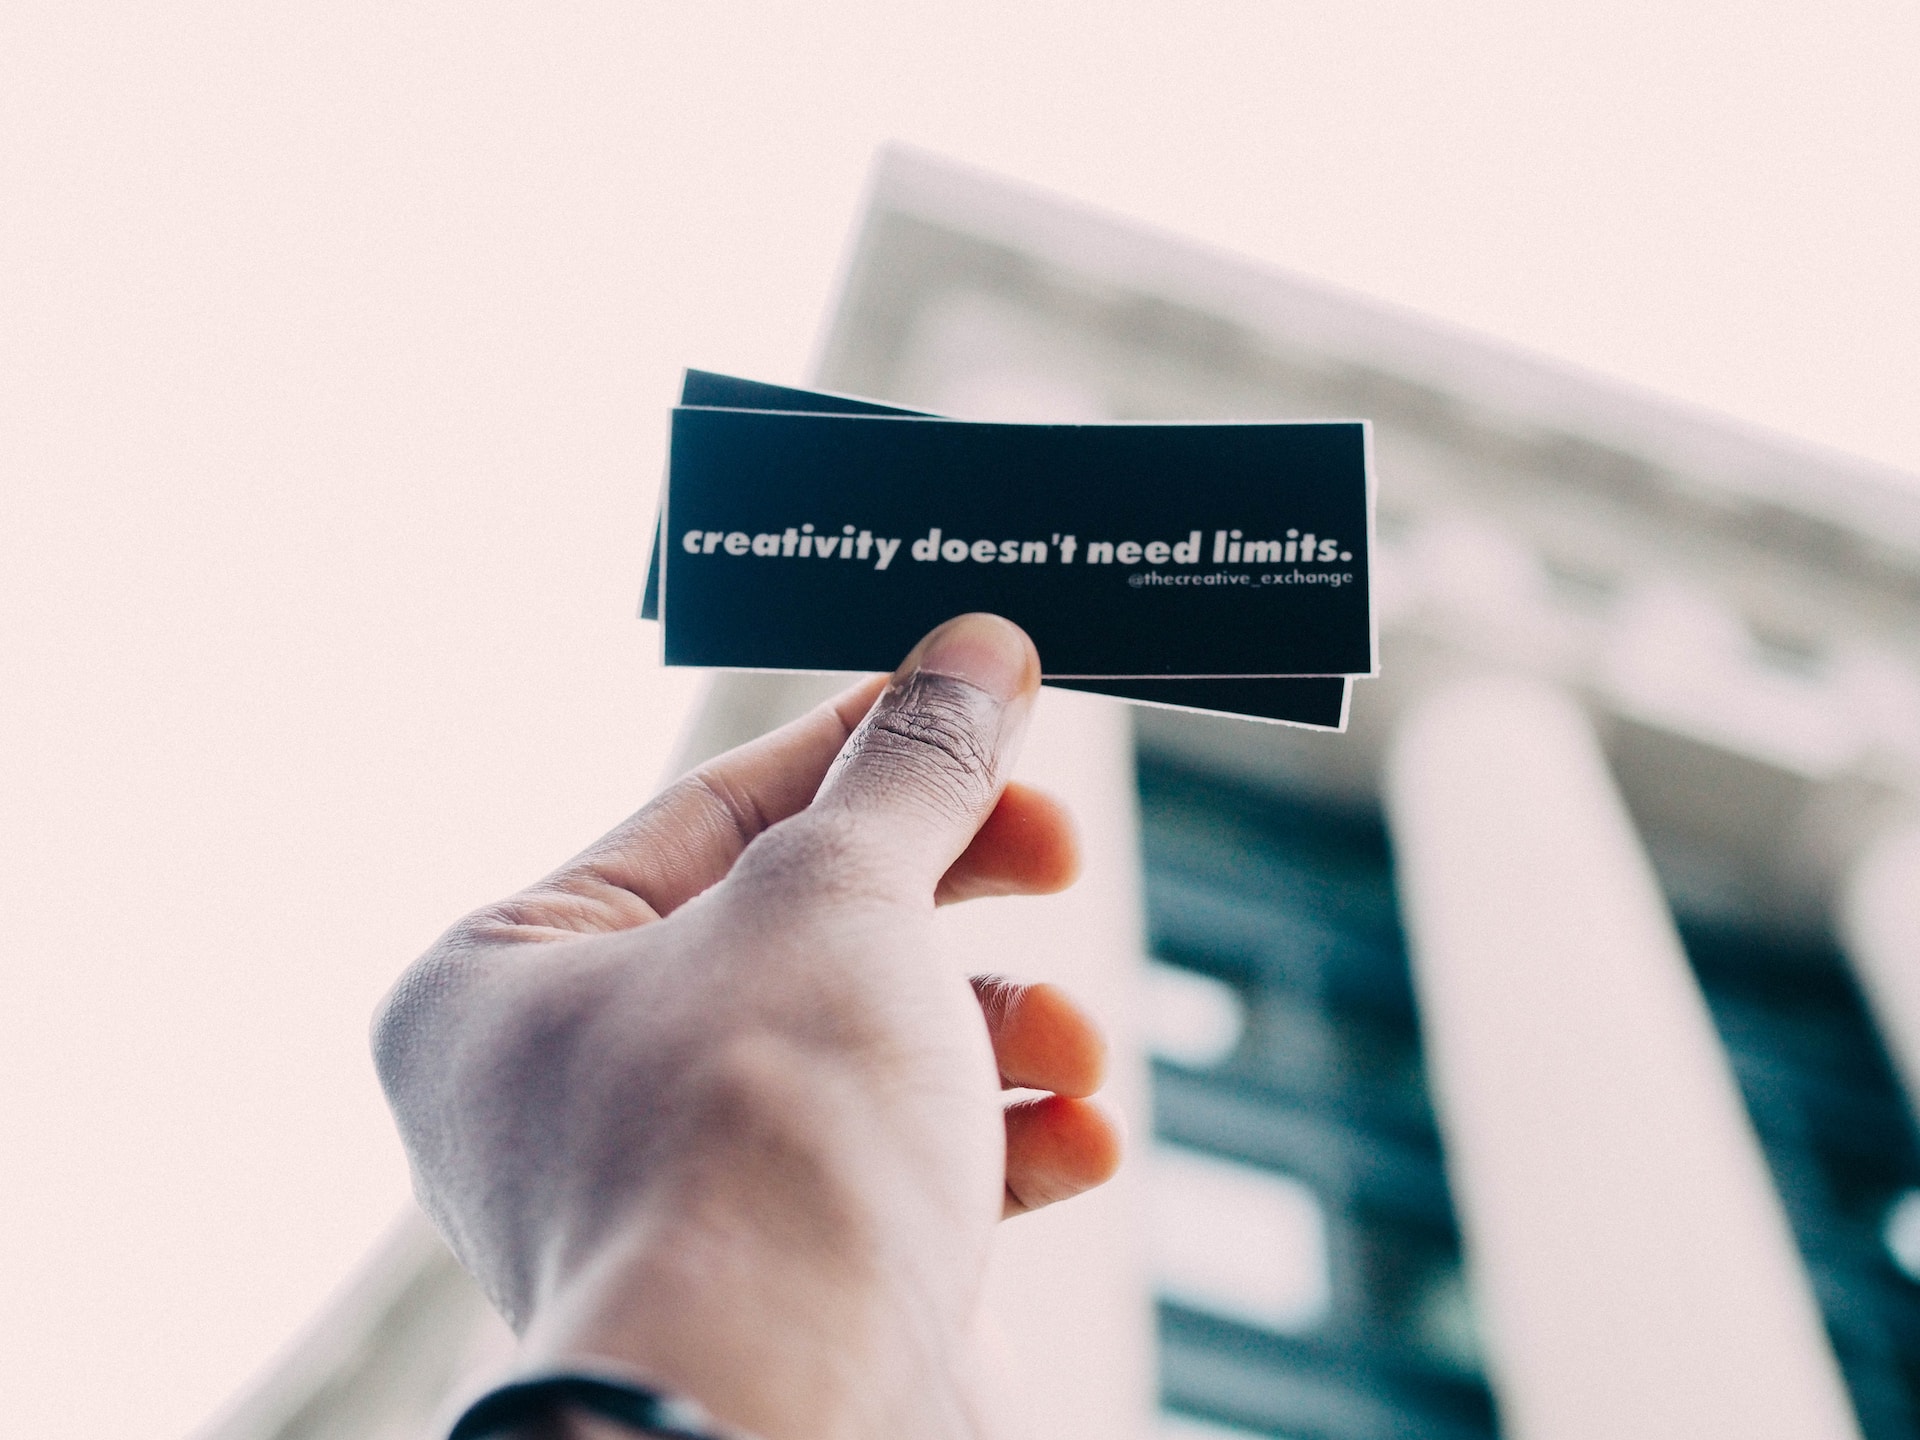 Person holding small card which says 'creativity doesn't need limits'